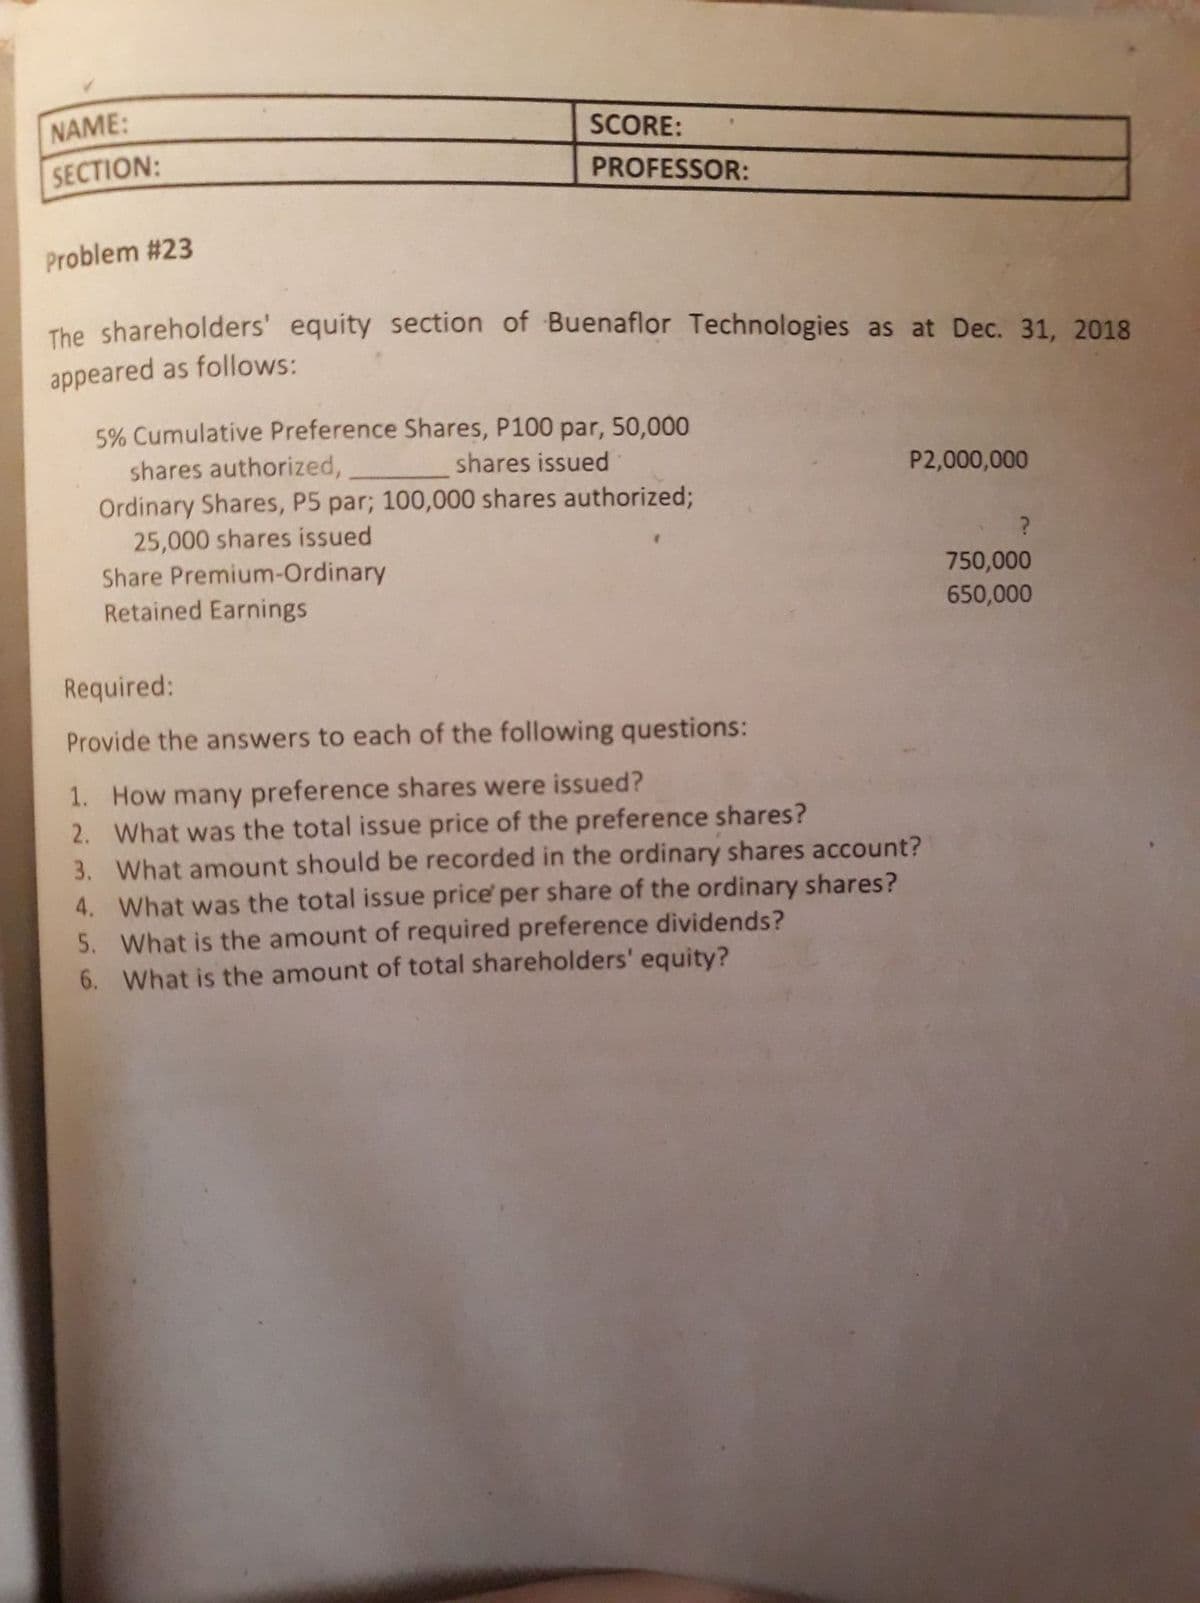 NAME:
SCORE:
SECTION:
PROFESSOR:
Problem #23
The shareholders' equity section of Buenaflor Technologies as at Dec. 31, 2018
appeared as follows:
5% Cumulative Preference Shares, P100 par, 50,000
shares authorized,
shares issued
P2,000,000
Ordinary Shares, P5 par; 100,000 shares authorized;
25,000 shares issued
Share Premium-Ordinary
Retained Earnings
750,000
650,000
Required:
Provide the answers to each of the following questions:
1. How many preference shares were issued?
2. What was the total issue price of the preference shares?
3. What amount should be recorded in the ordinary shares account?
4. What was the total issue price' per share of the ordinary shares?
5. What is the amount of required preference dividends?
6. What is the amount of total shareholders' equity?
